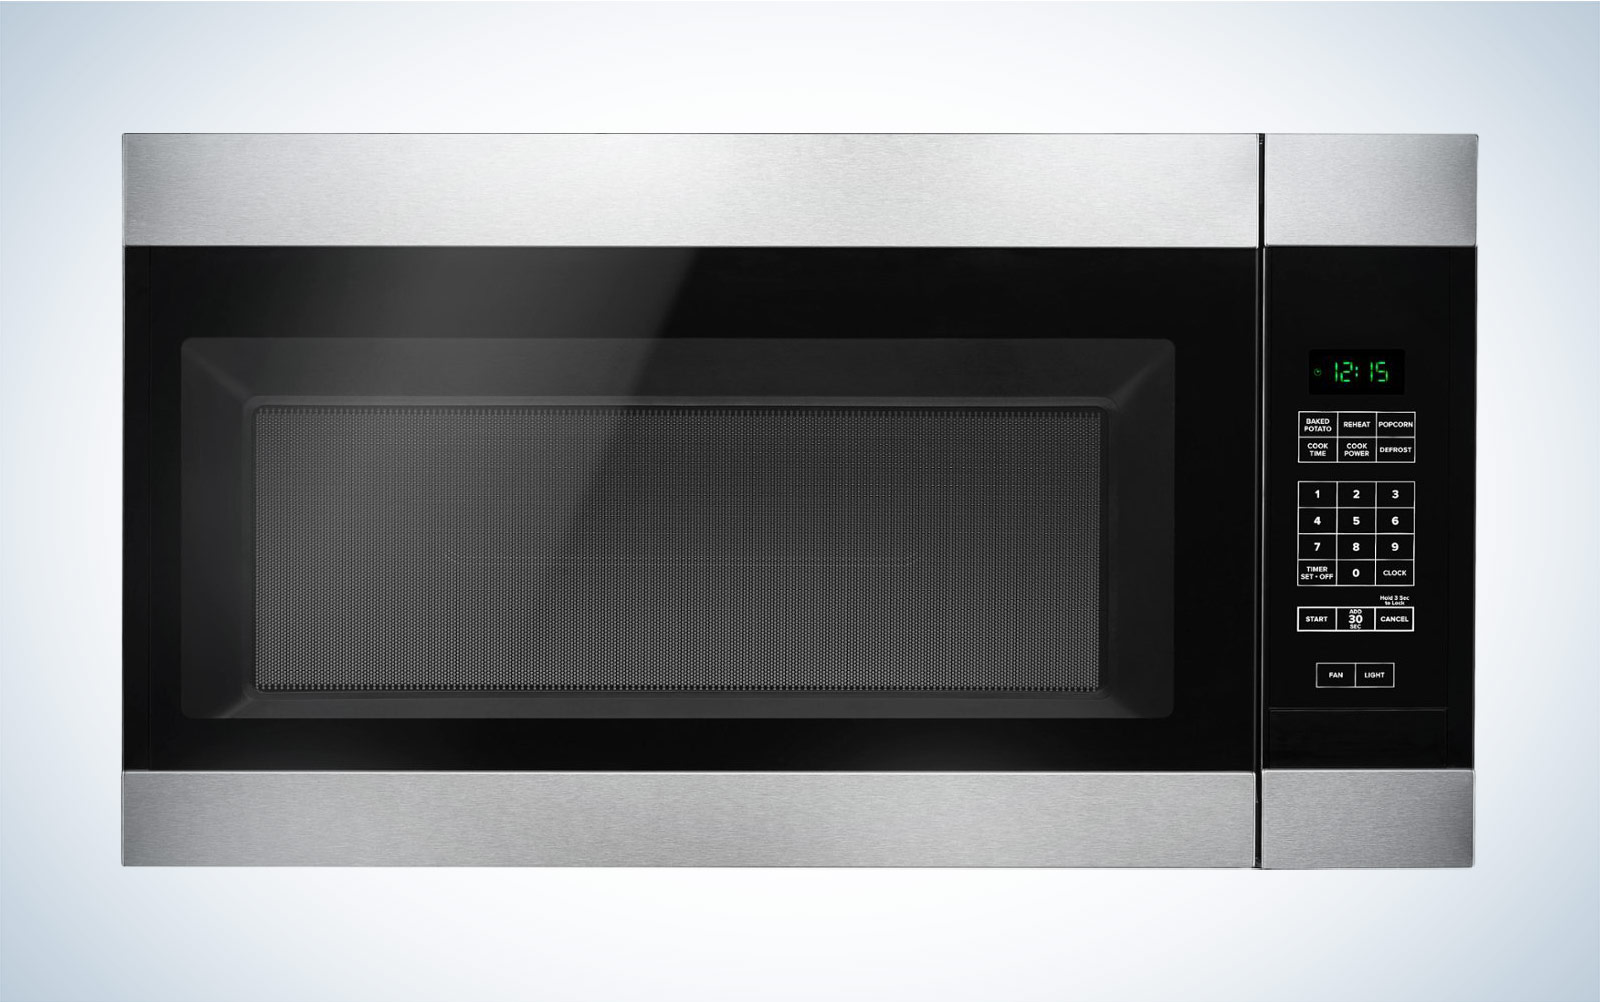 HELP-Will my over the range microwave be too low?